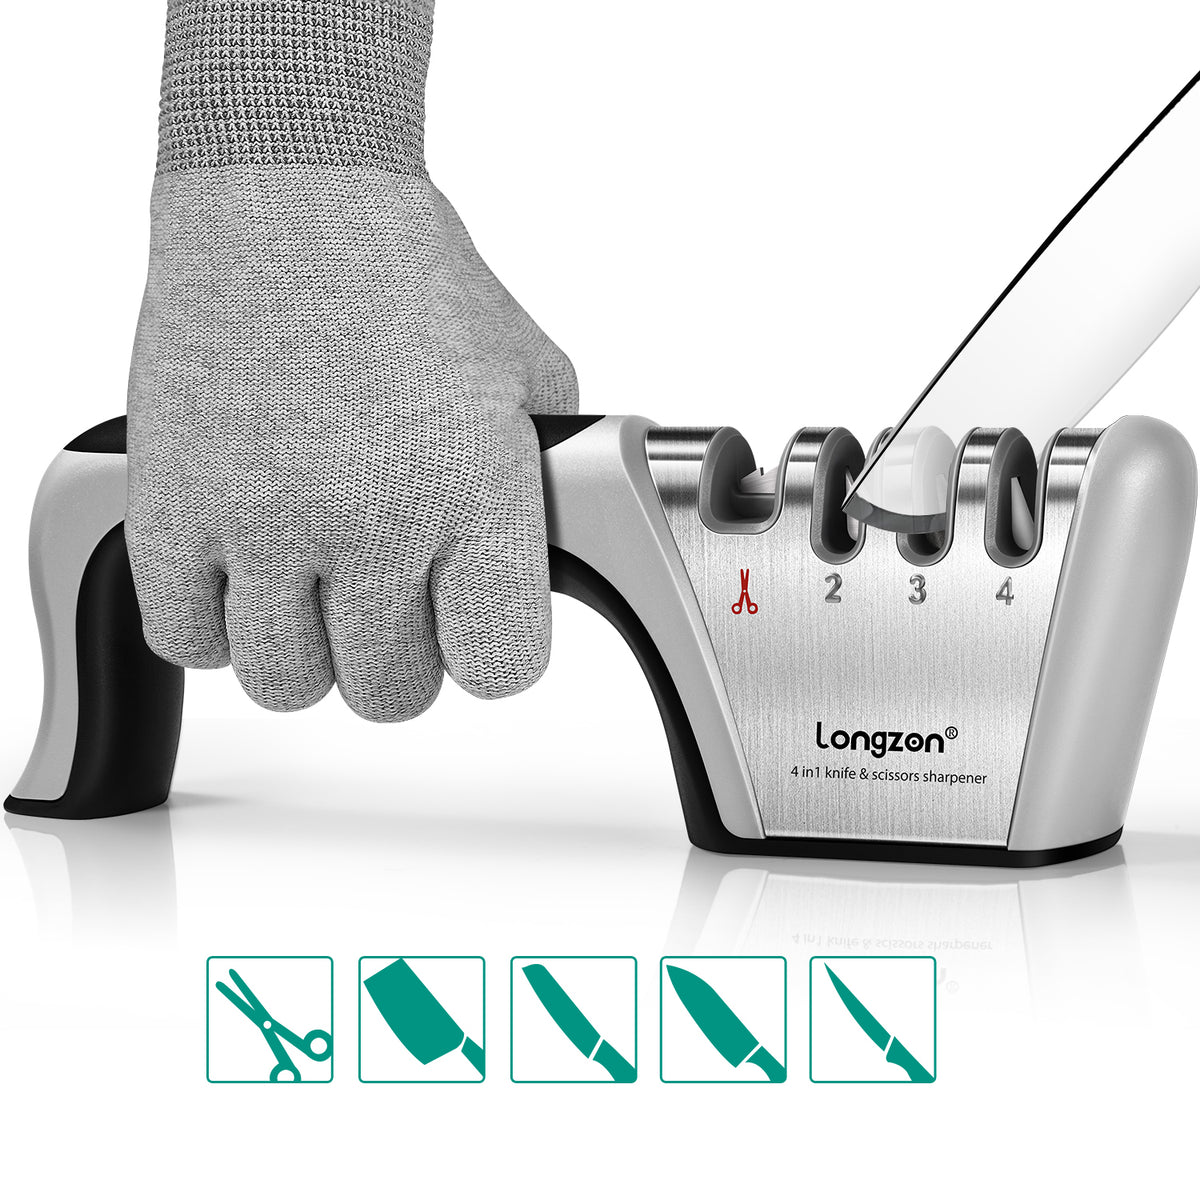 4-in-1 longzon 4 Stage Knife Sharpener with A Pair of Cut-Resistant Glove, Original Premium Polish Blades, Best Kitchen Knife Sharpener Really Works